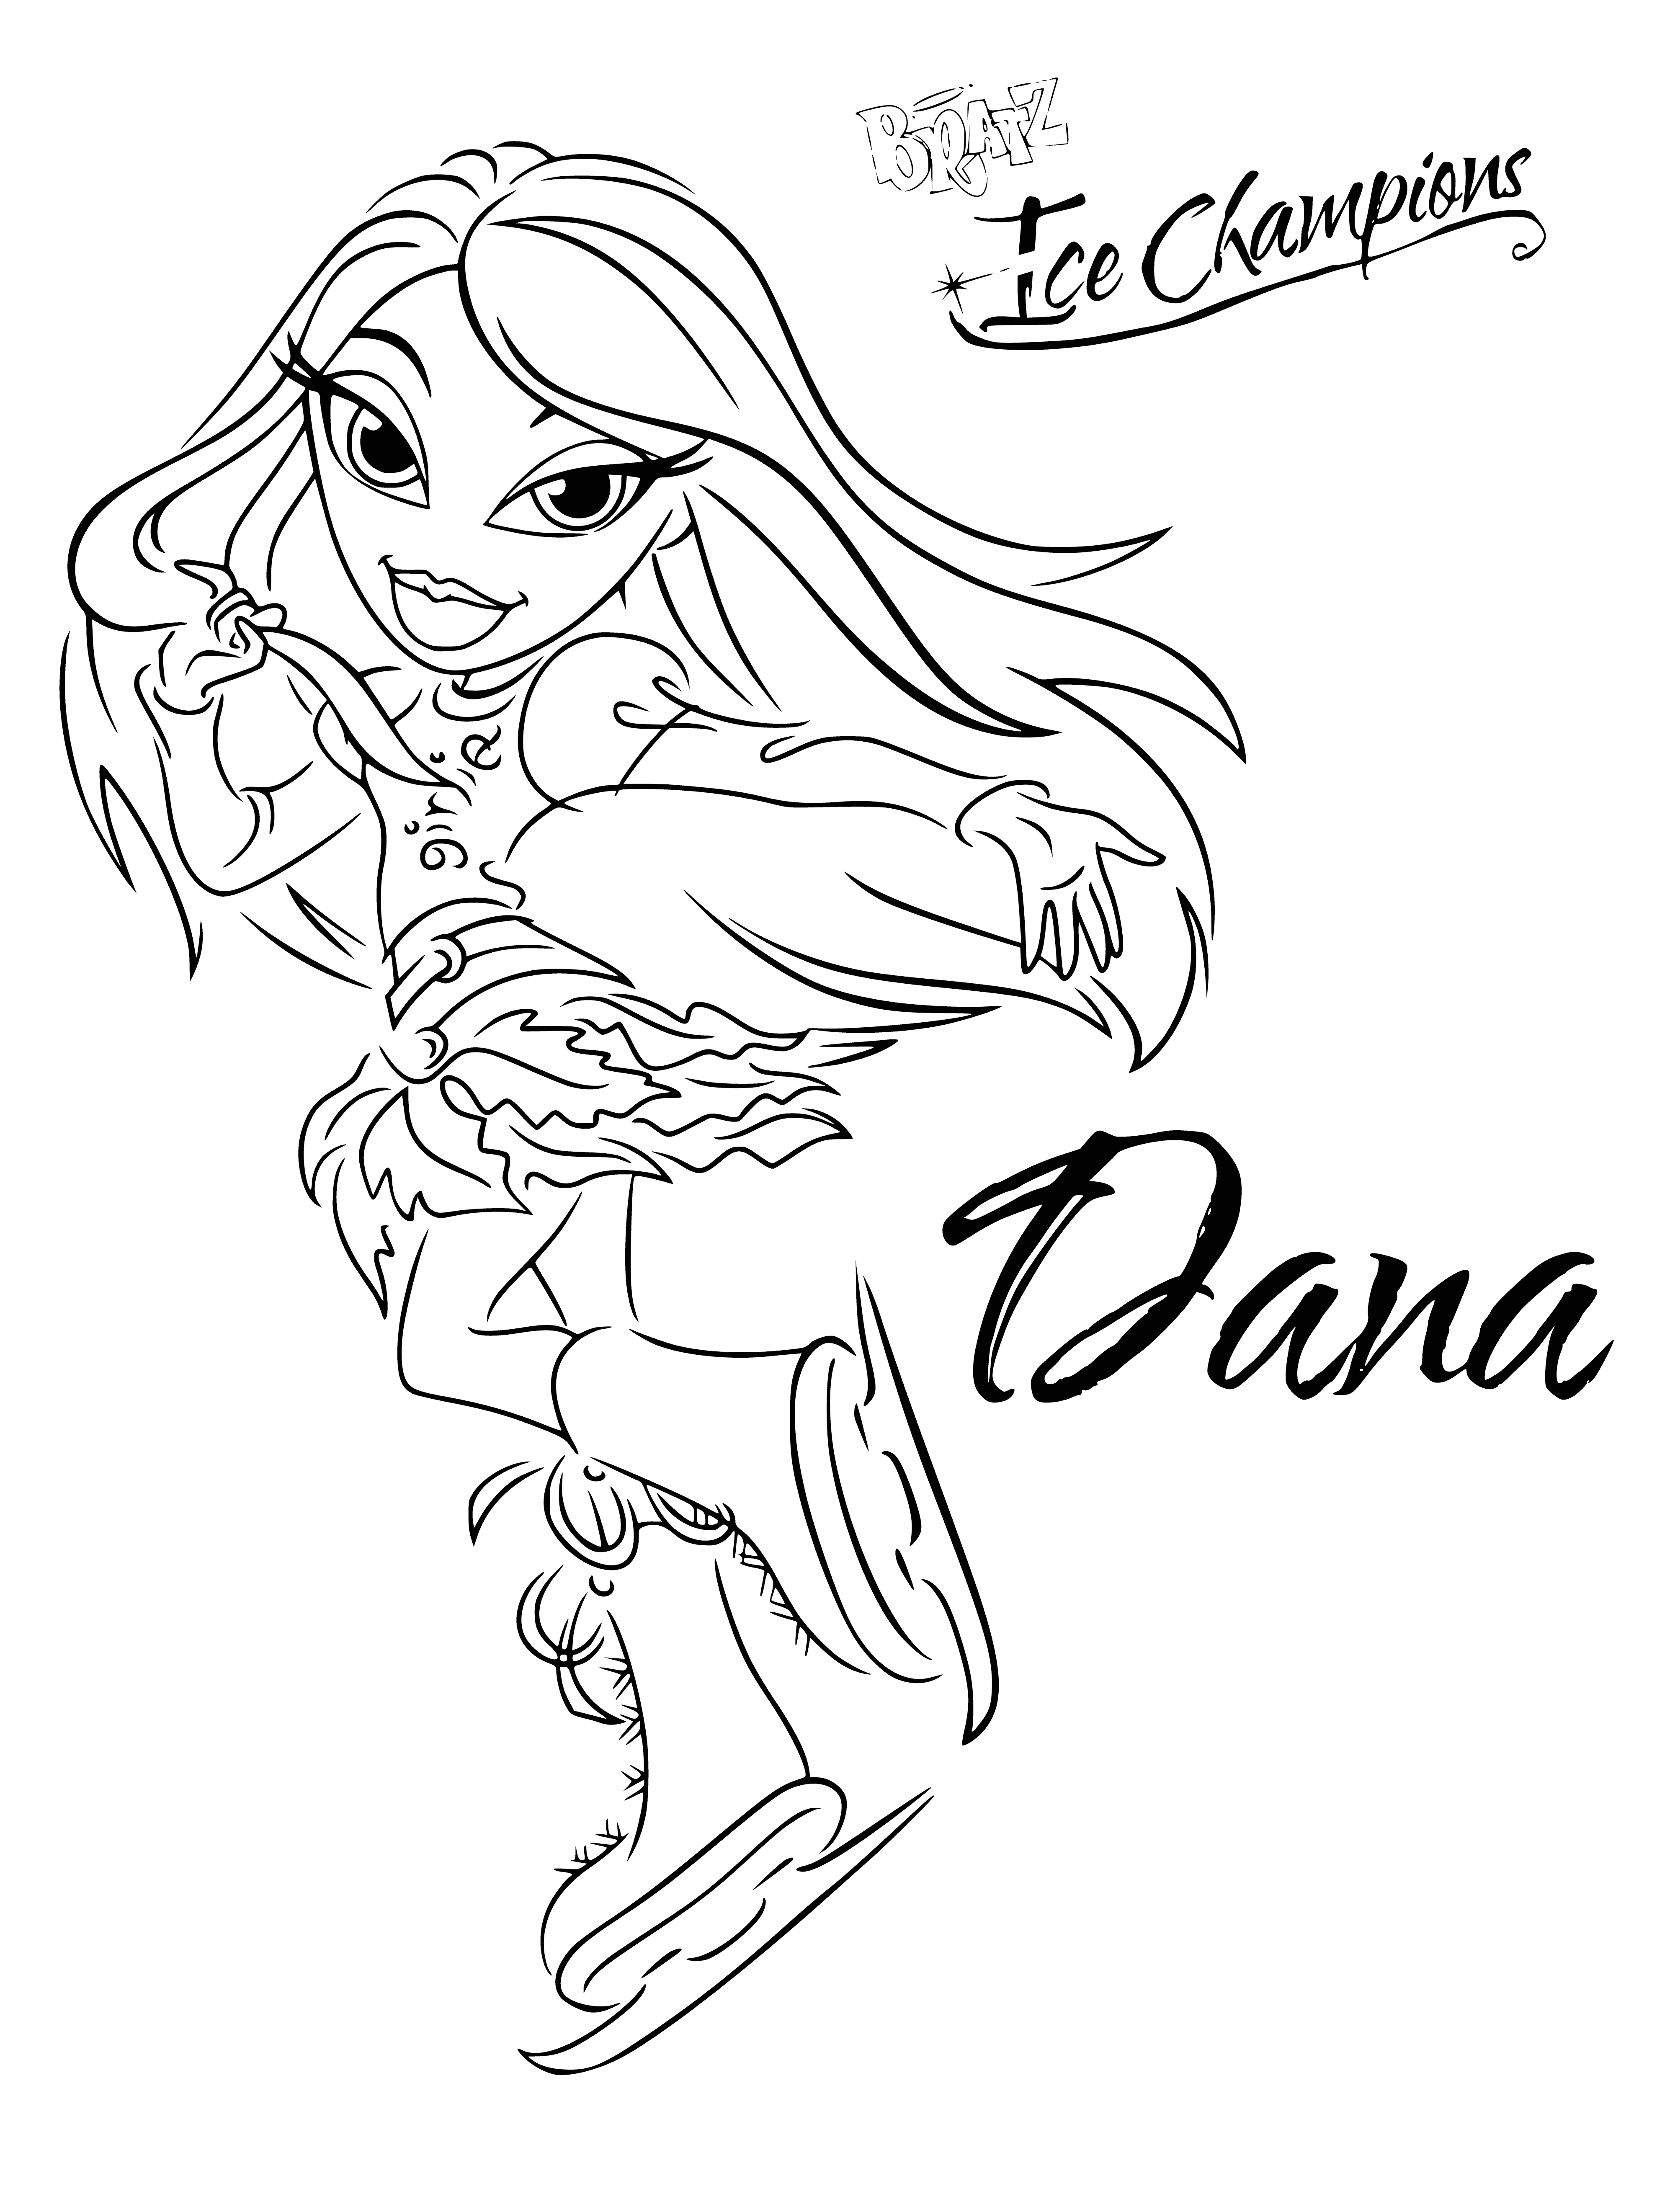 coloring page: Brother Dana is a surfer Bratz doll who loves adventure, the beach and spending time with pals.